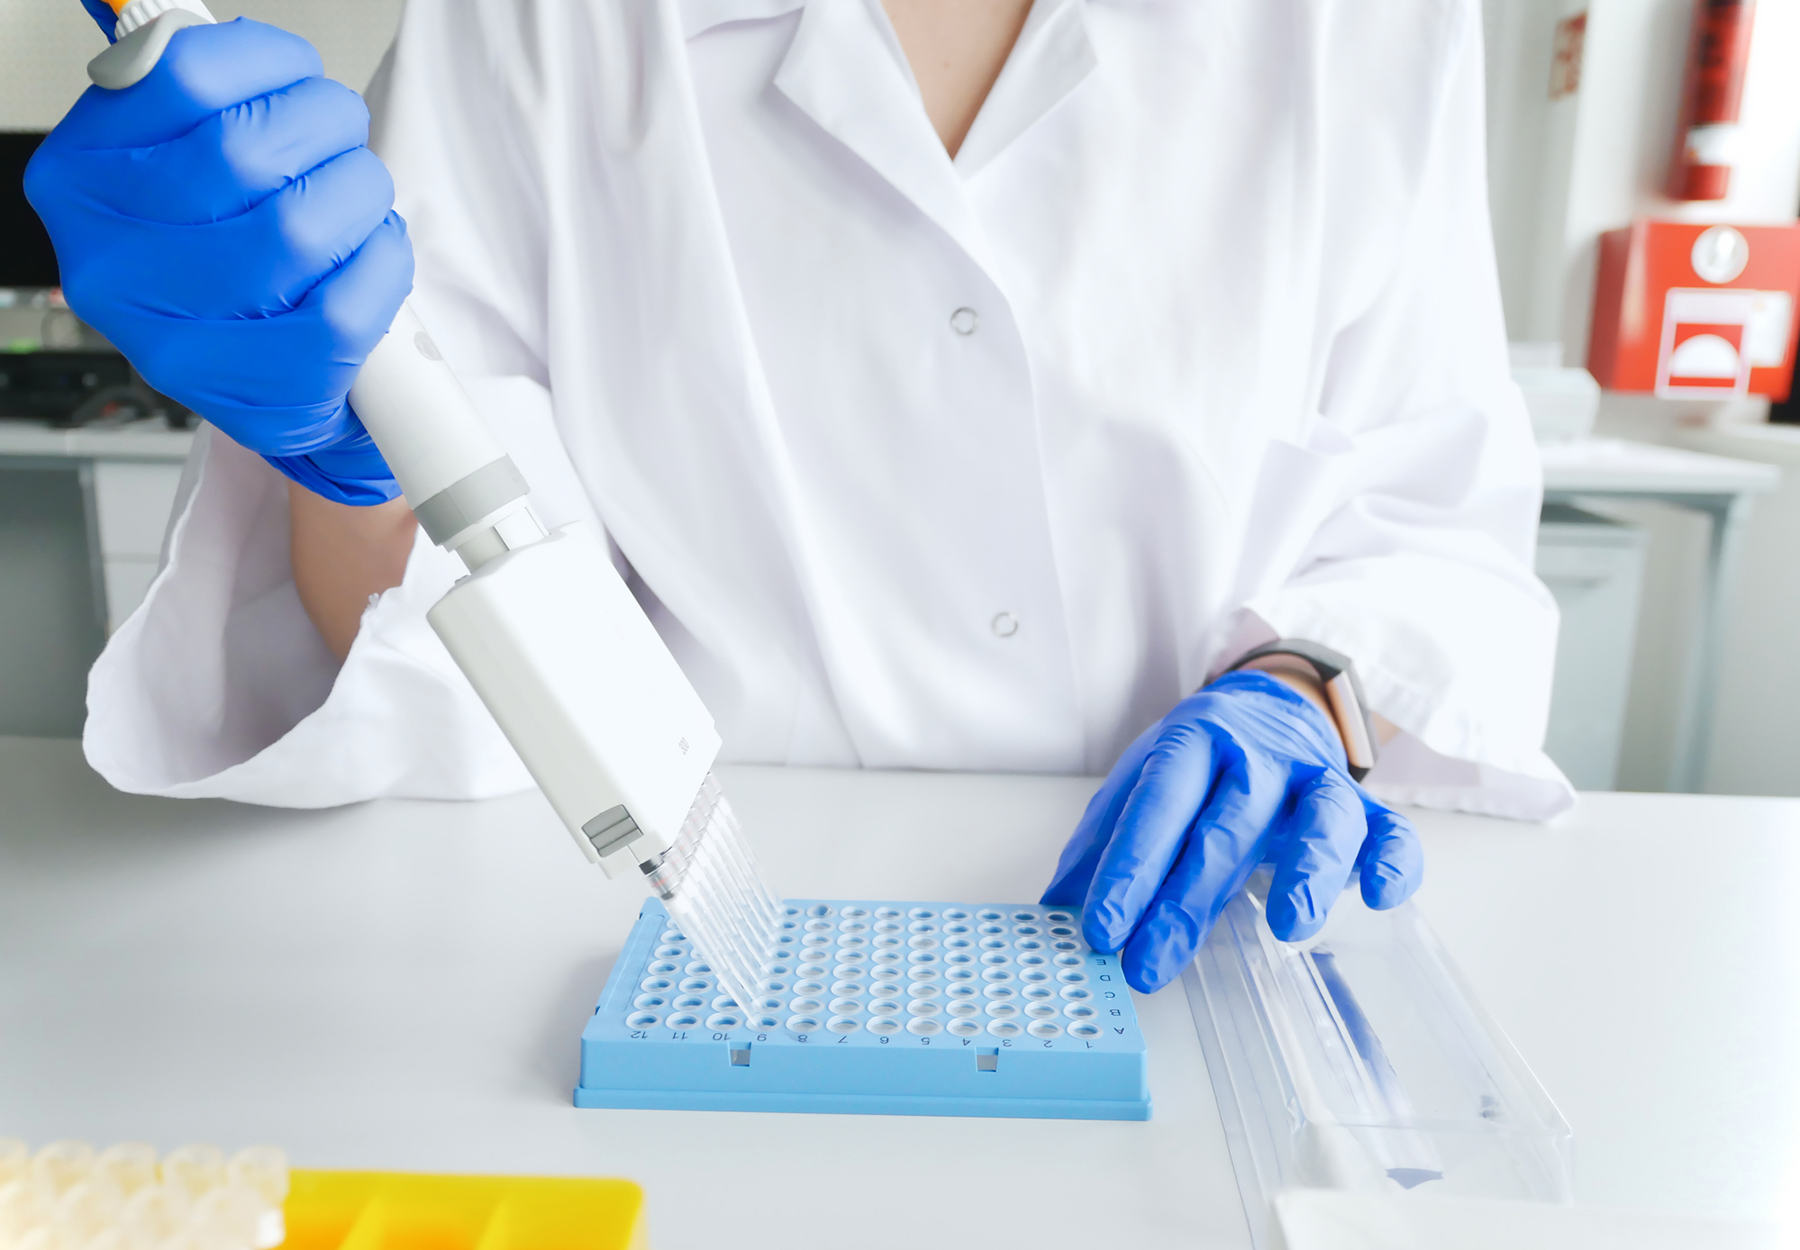 Hands of scientist working with multichannel pipette and multi well plates. research technician with multipipette to perform genetic testing. Stock photo.